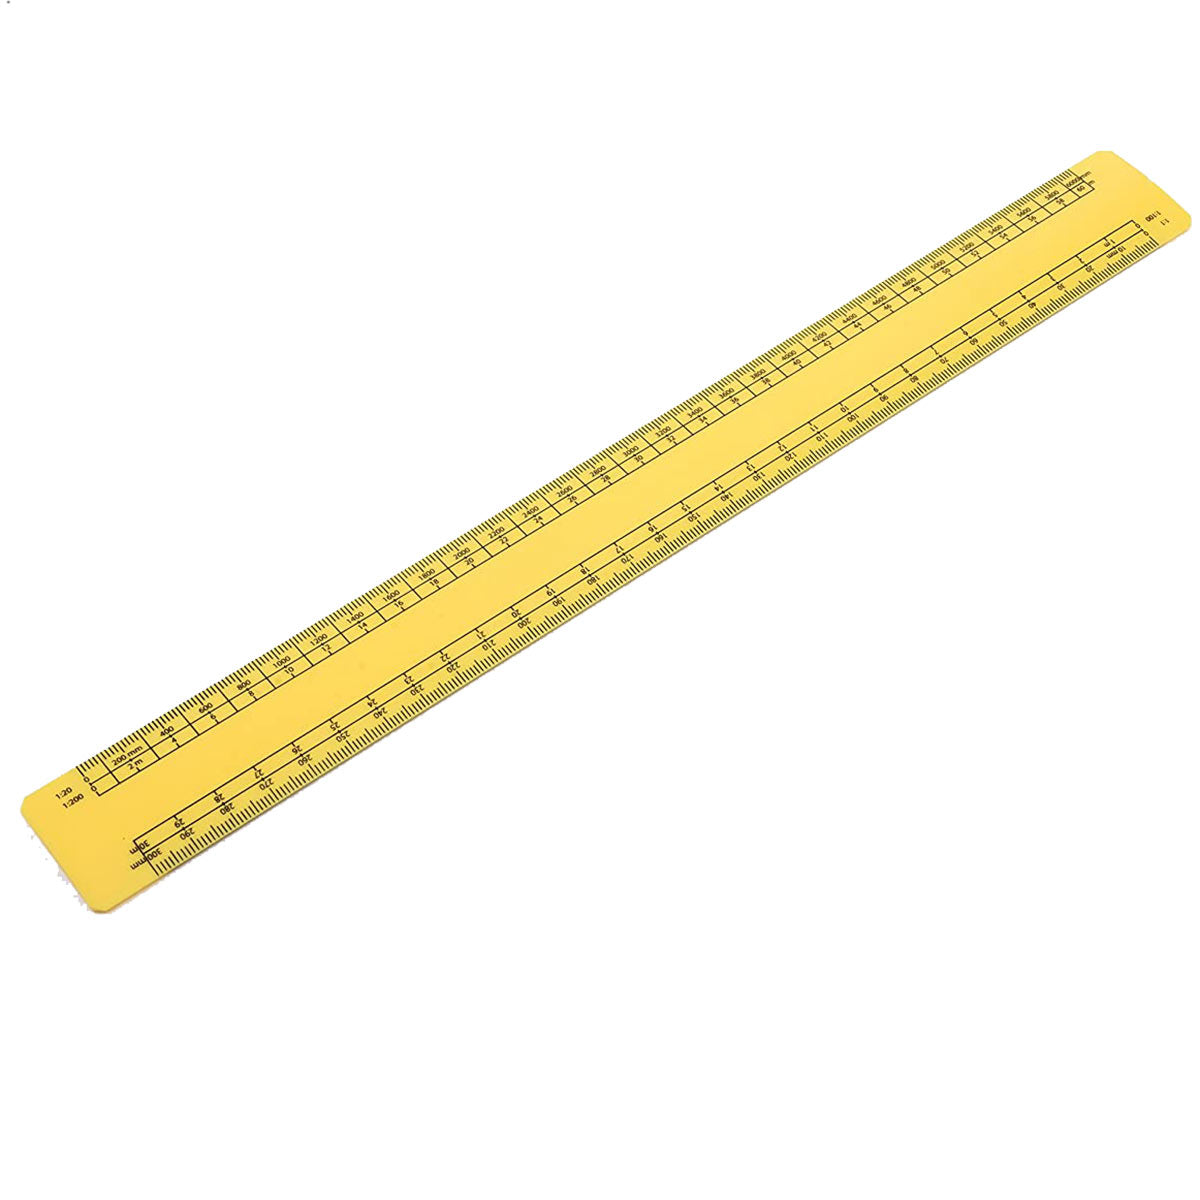 Helix - 30 cm Architects Scale Ruler